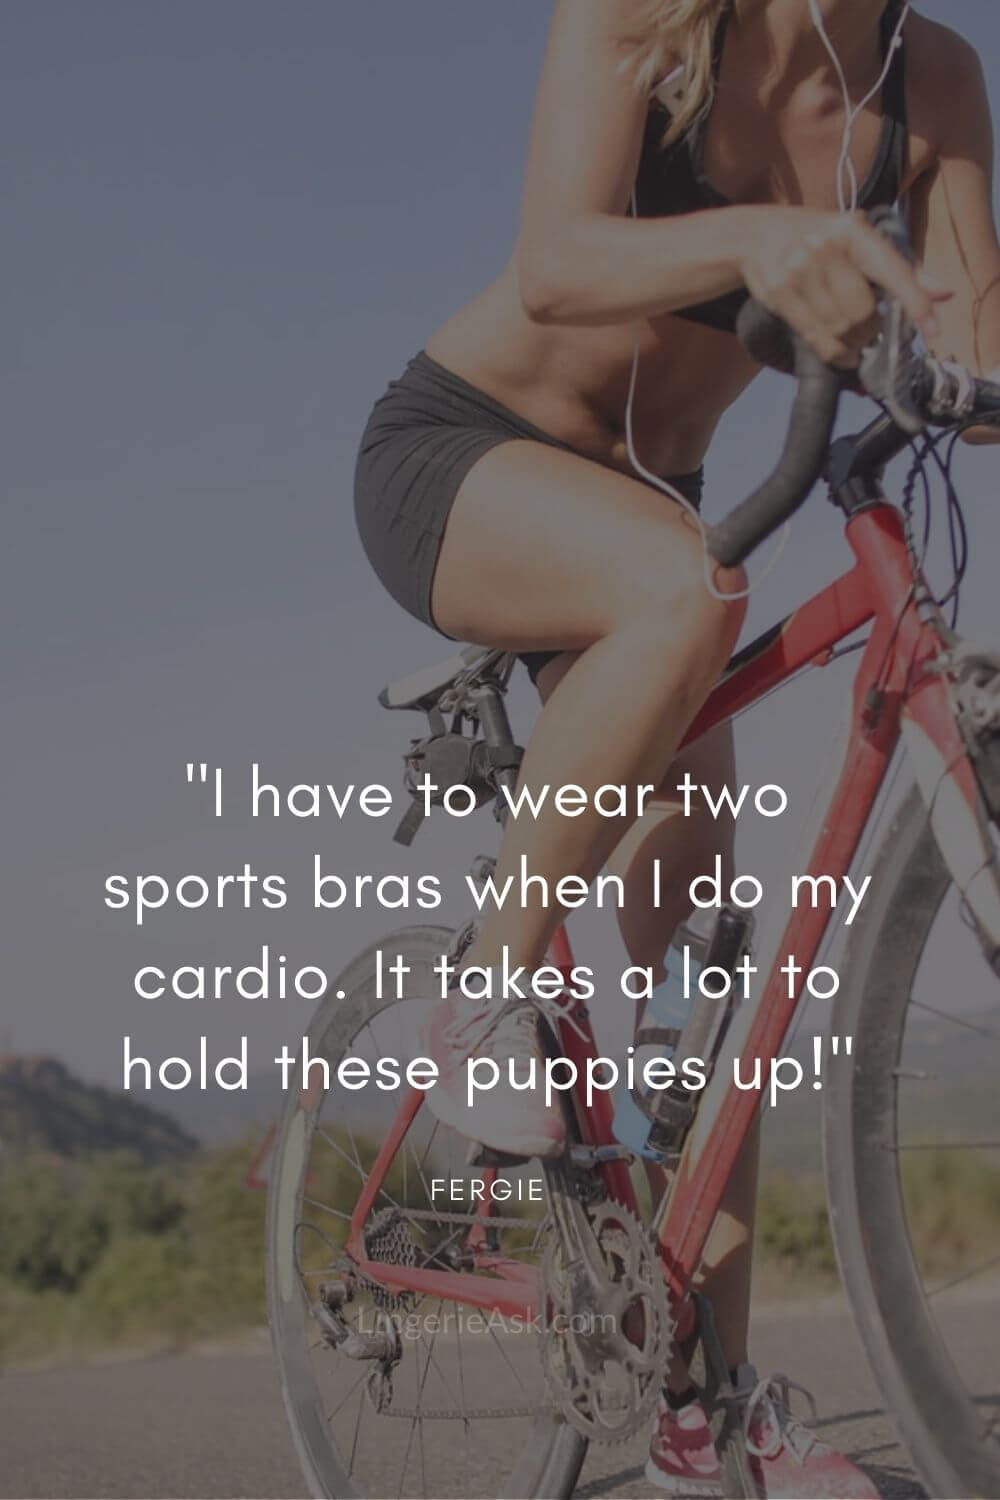 I have to wear two sports bras when I do my cardio. It takes a lot to hold these puppies up!